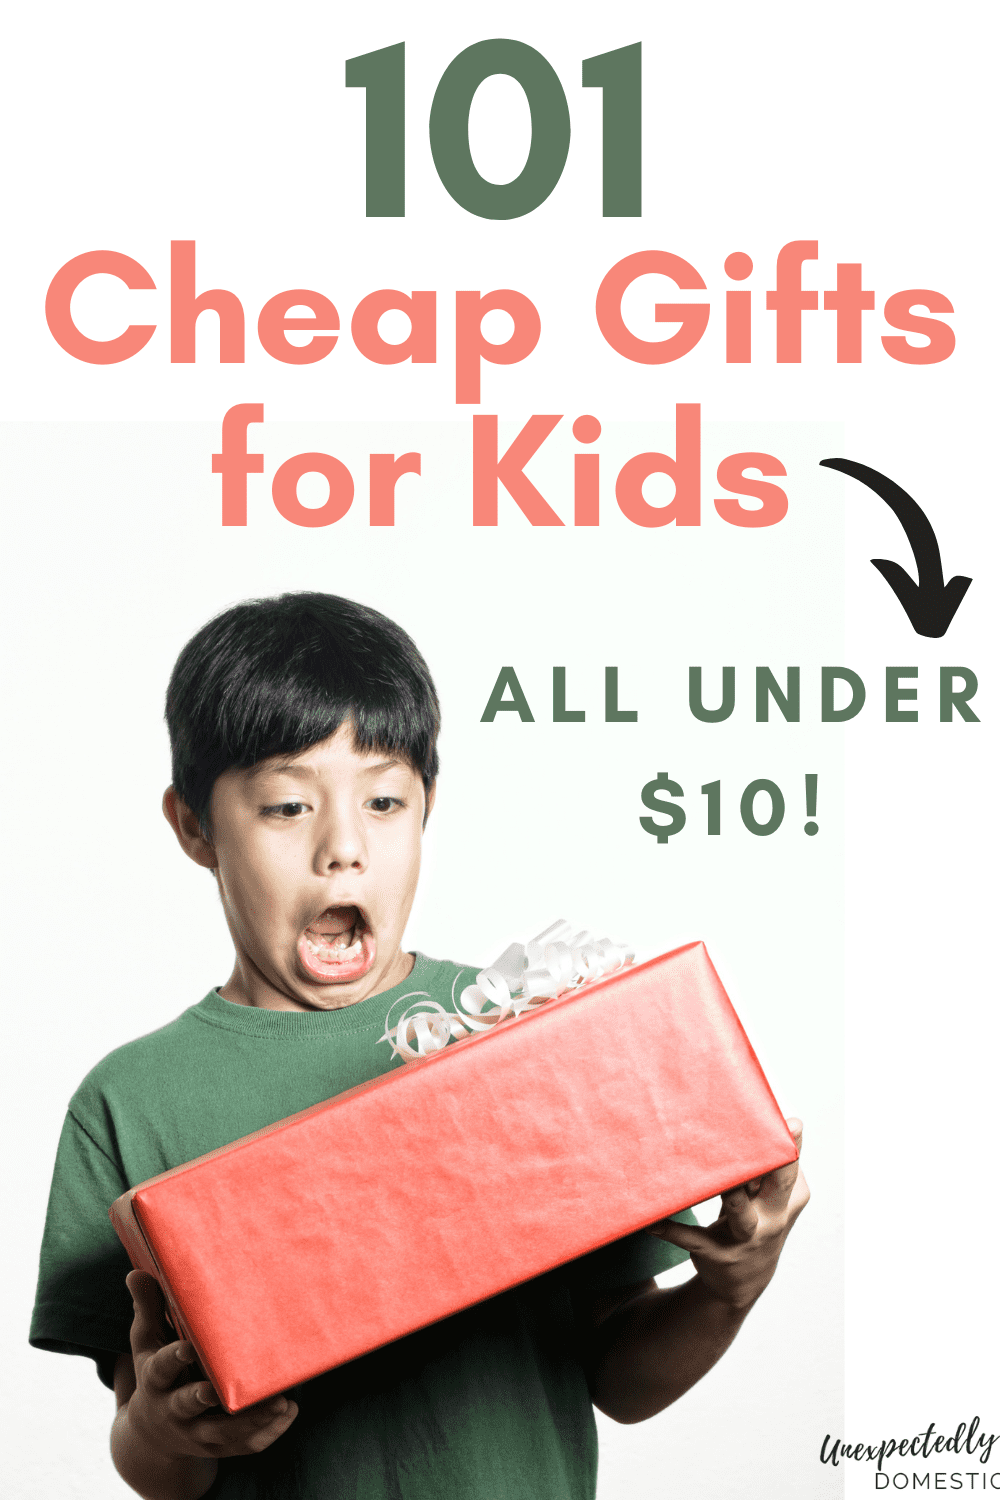 50 MORE Awesome Cheap Kid's Gifts that Cost $10 or Less - Thrifty